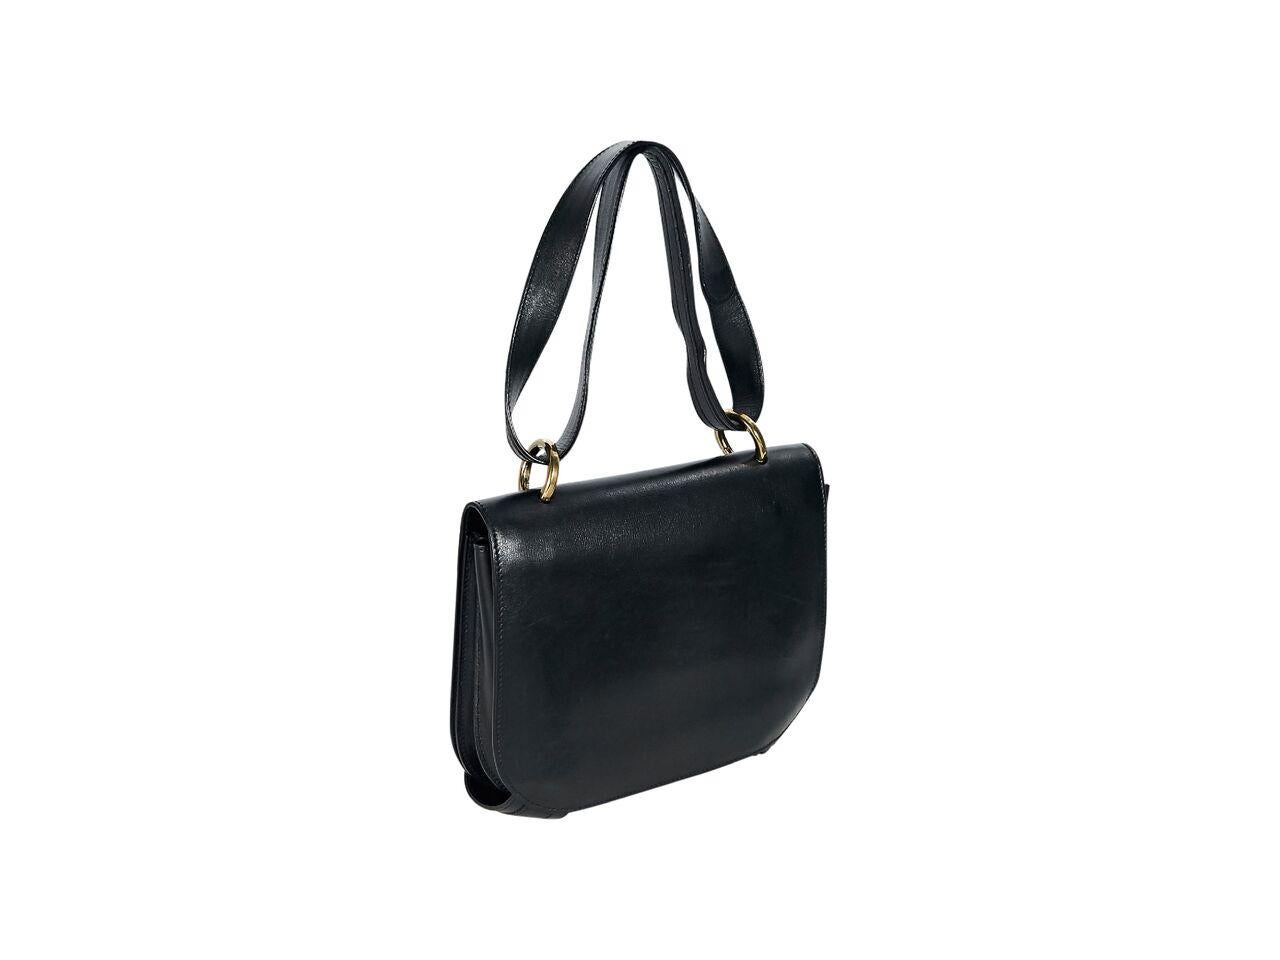 Product details:  Black leather shoulder bag by Salvatore Ferragamo.  Shoulder strap.  Front flap with double strap closure.  Leather lined interior with inner zip and slide pockets.  Goldtone hardware.  9